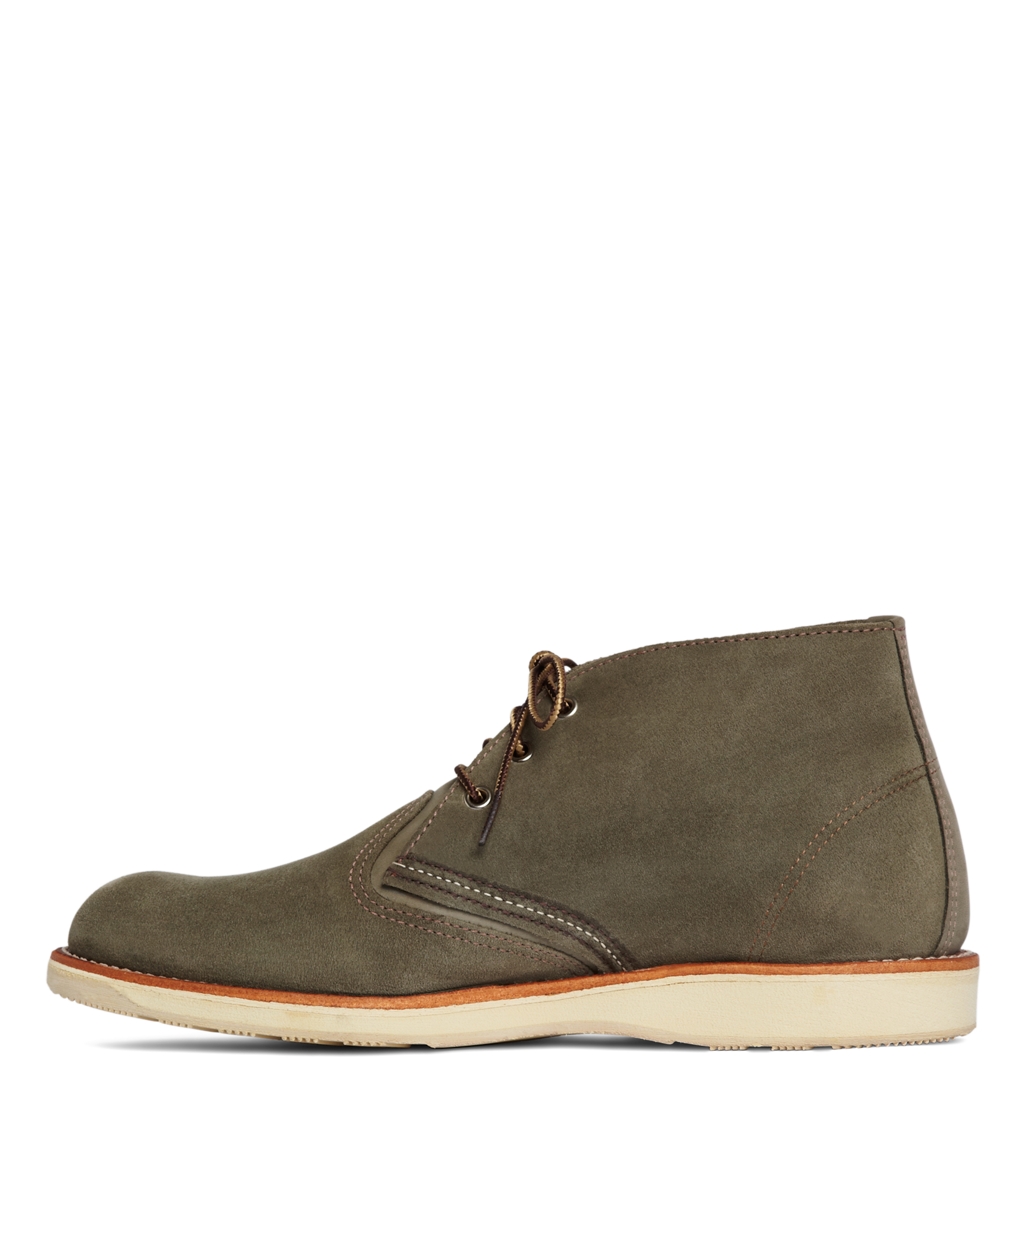 Lyst - Brooks brothers Red Wing 3144 Leather Desert Boots in Natural ...